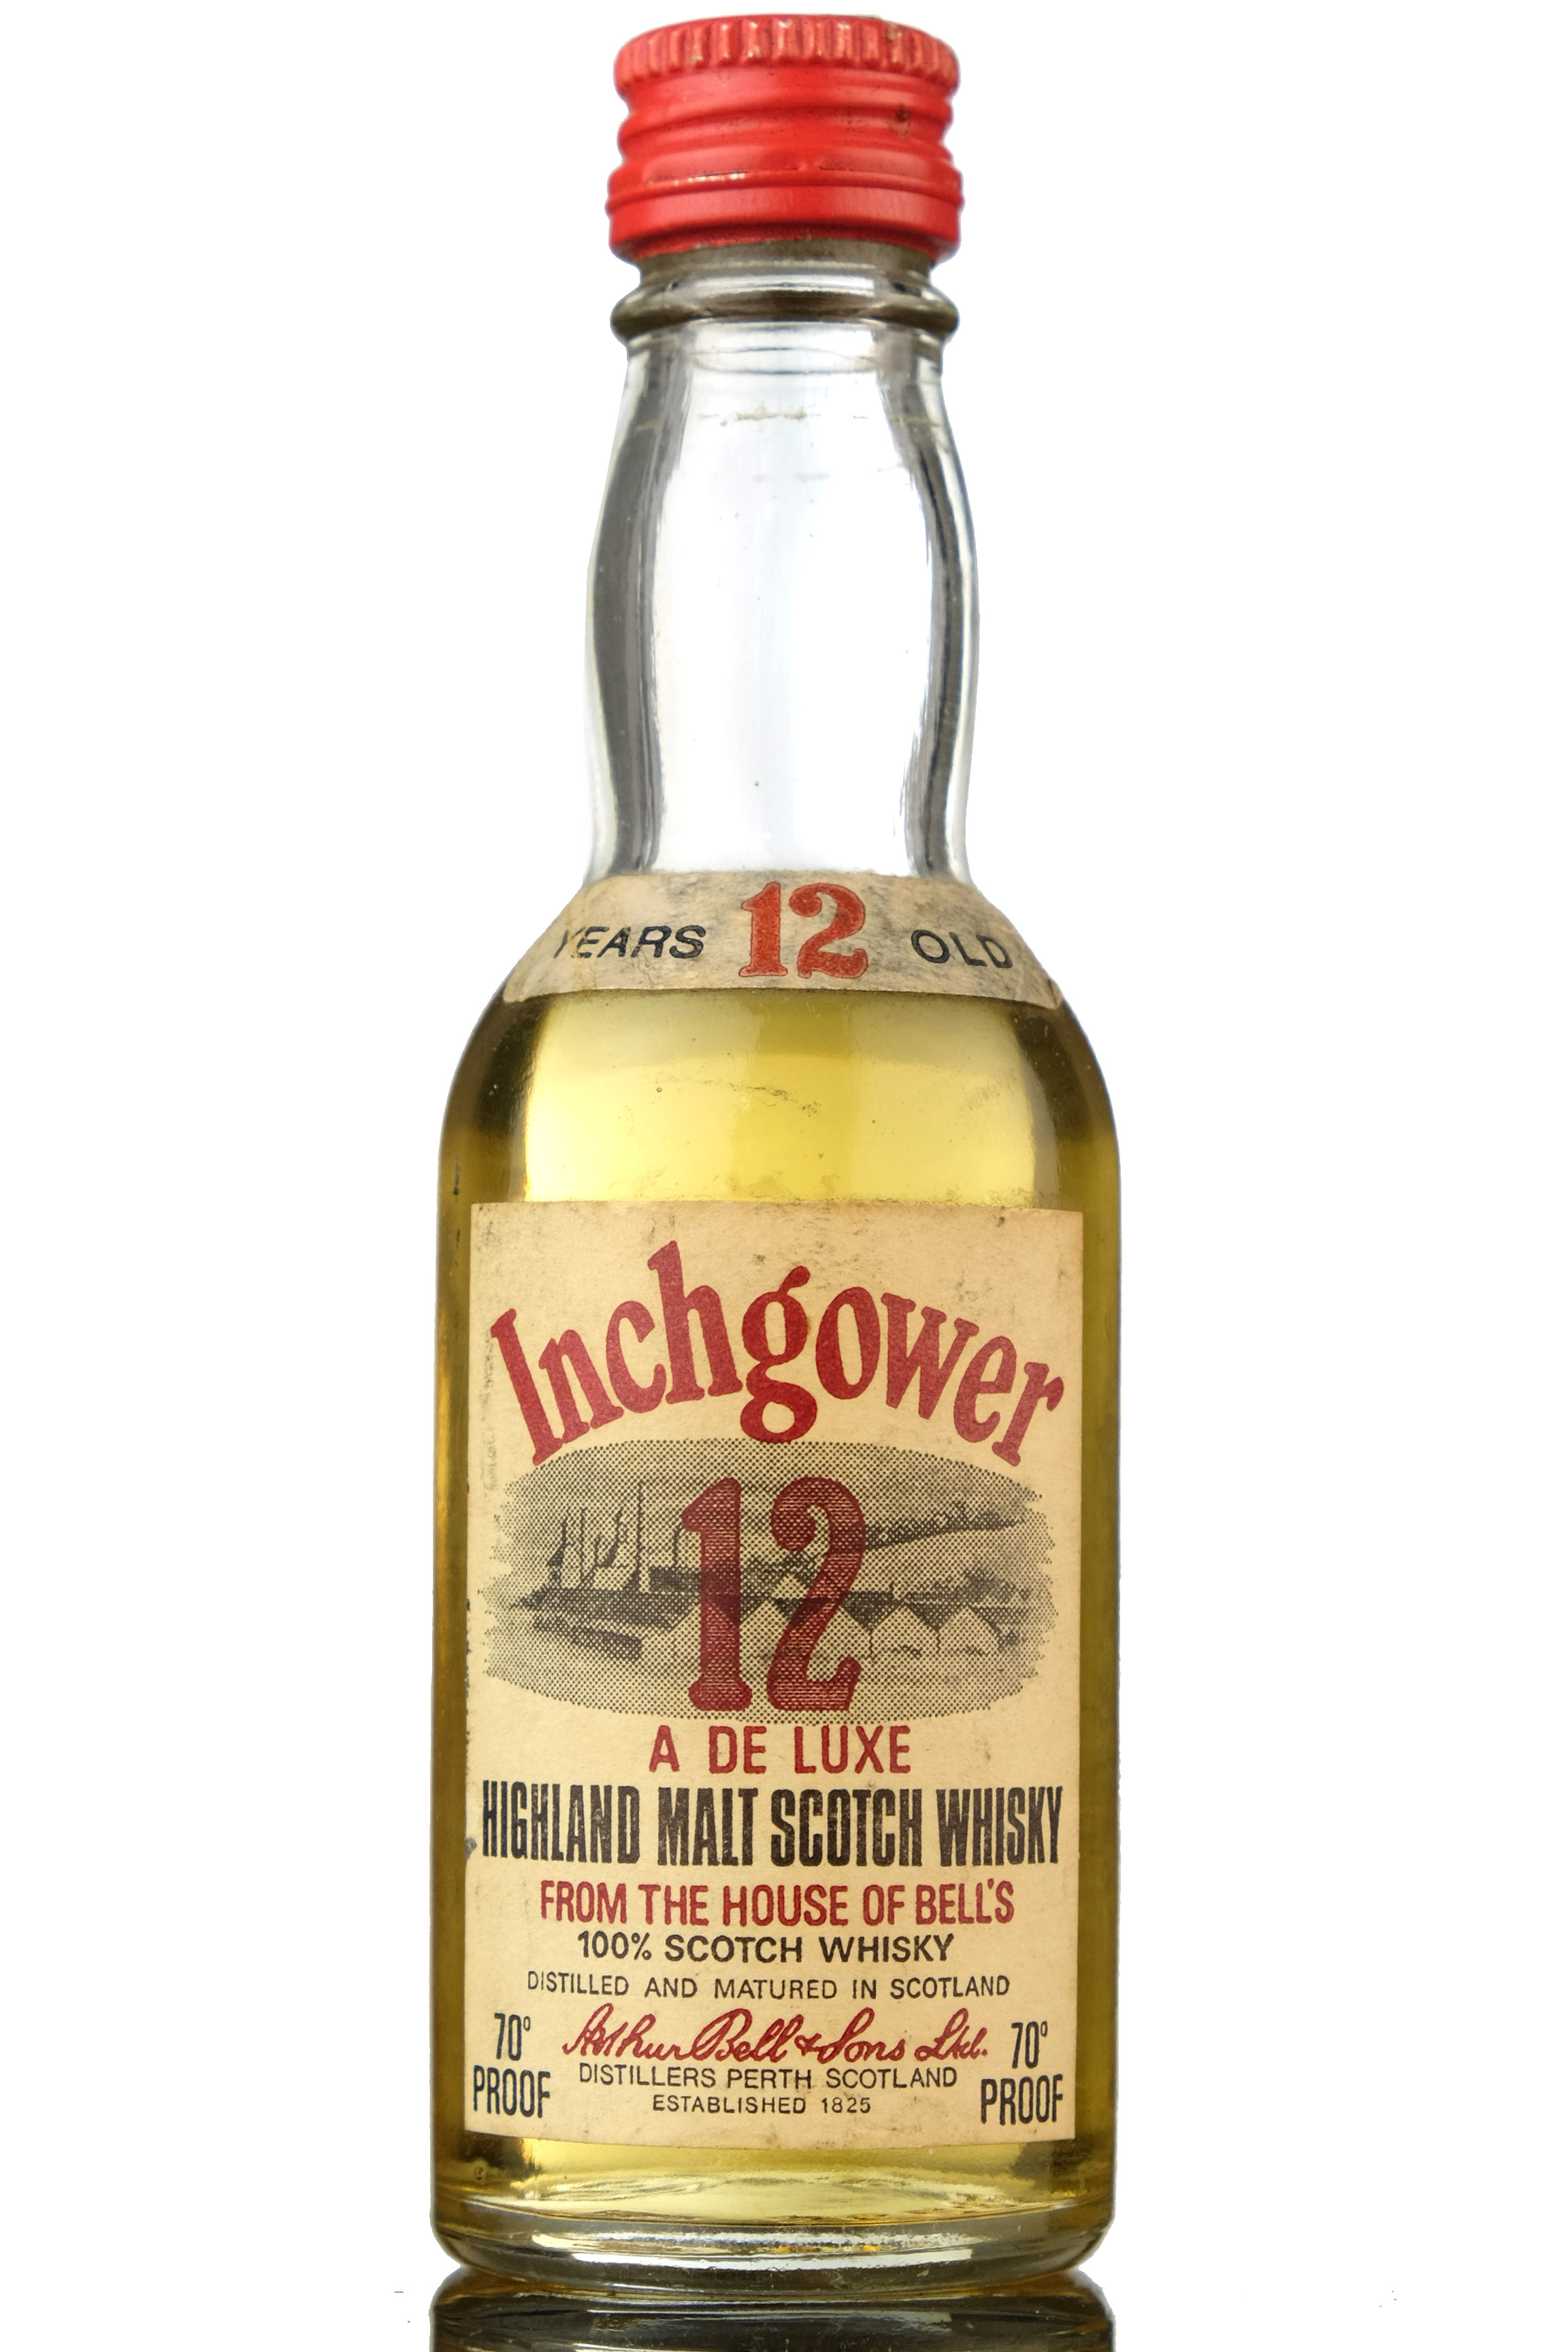 Inchgower 12 Year Old - 70 Proof Miniature